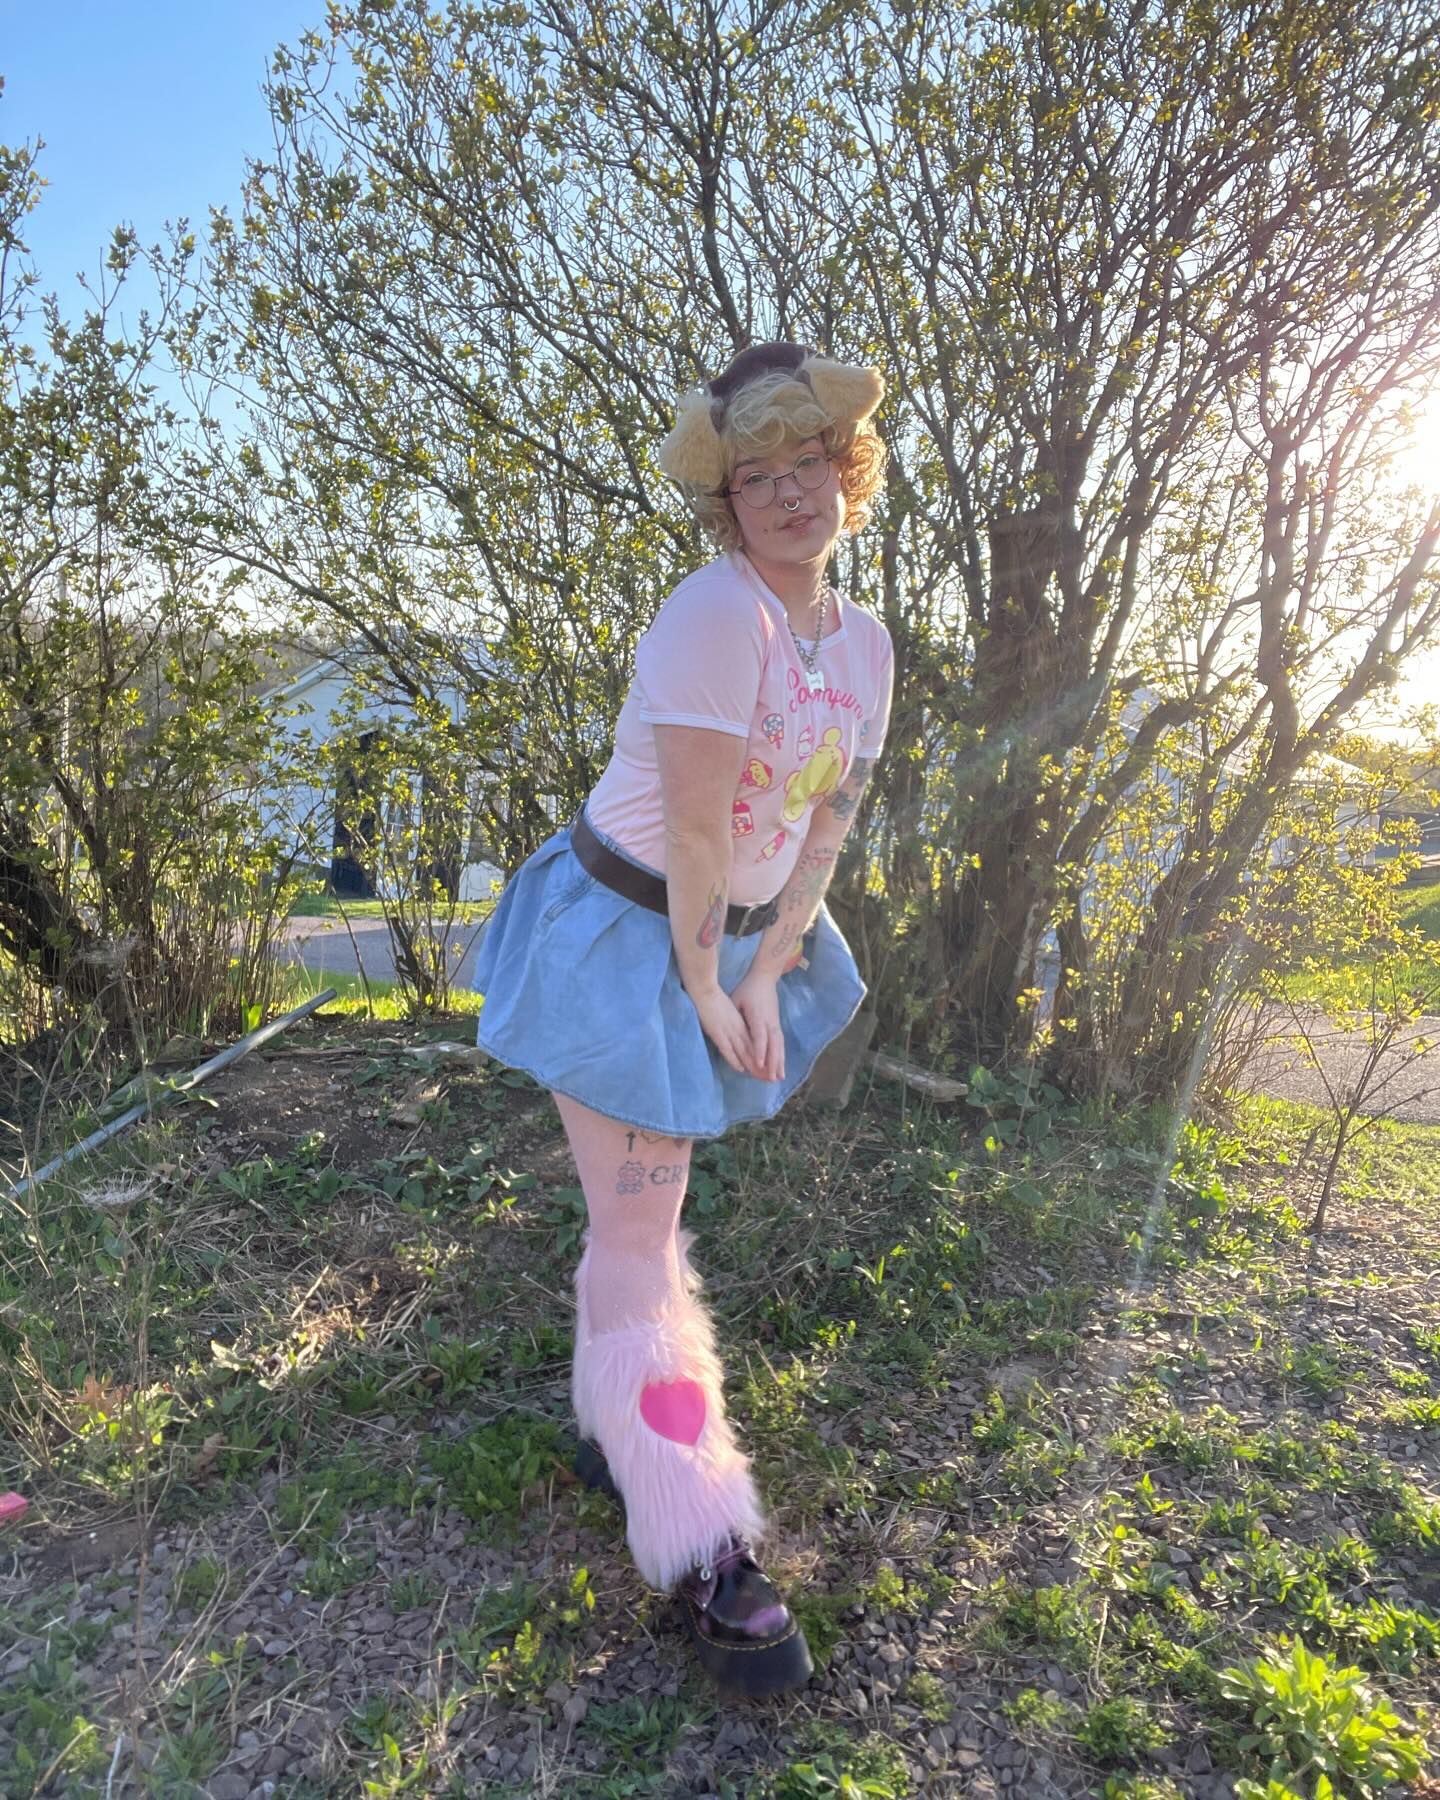 HAPPY BIRTHDAY TO THE P-DAWG!! 🐶 POMPOMPURIN!!! 🌼💛☀️💝

I’m really happy with how this cosplay came out 🥹👉🏻👈🏻 Pompom wasn’t on my radar until quite recently but!!! I love him so much!!! And I’m glad to have found merch that isn’t just yellow 😅💛 also the wind was CRAZY taking these.. I was trying so hard not to let my skirt just.. fly 🥴

Shirt & skirt- @hottopic 

#sponsoredbyHT #HTFxPompompurin #sanrio #pompompurin #pompom #hellokitty #hellokittyandfriends #pudding #goldenretriever #sanriocosplay #pompompurincosplay #hellokittycosplay